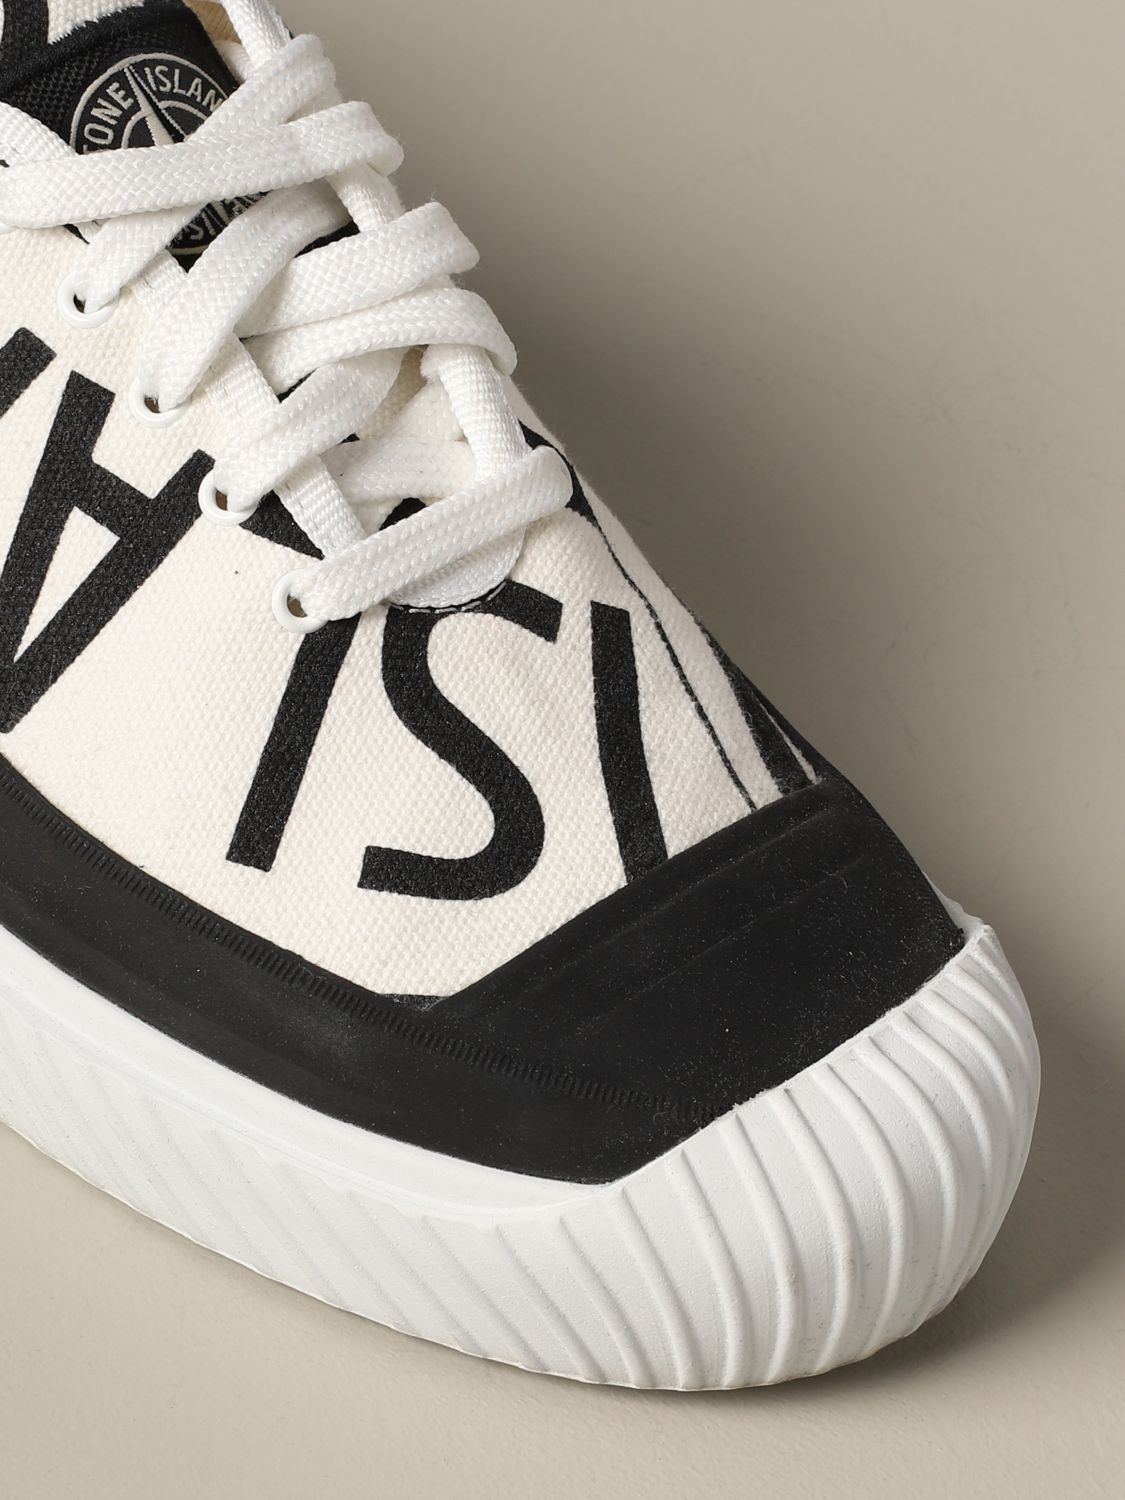 STONE sneakers printed canvas - Black | Stone Island sneakers MO7215S0166 online at GIGLIO.COM